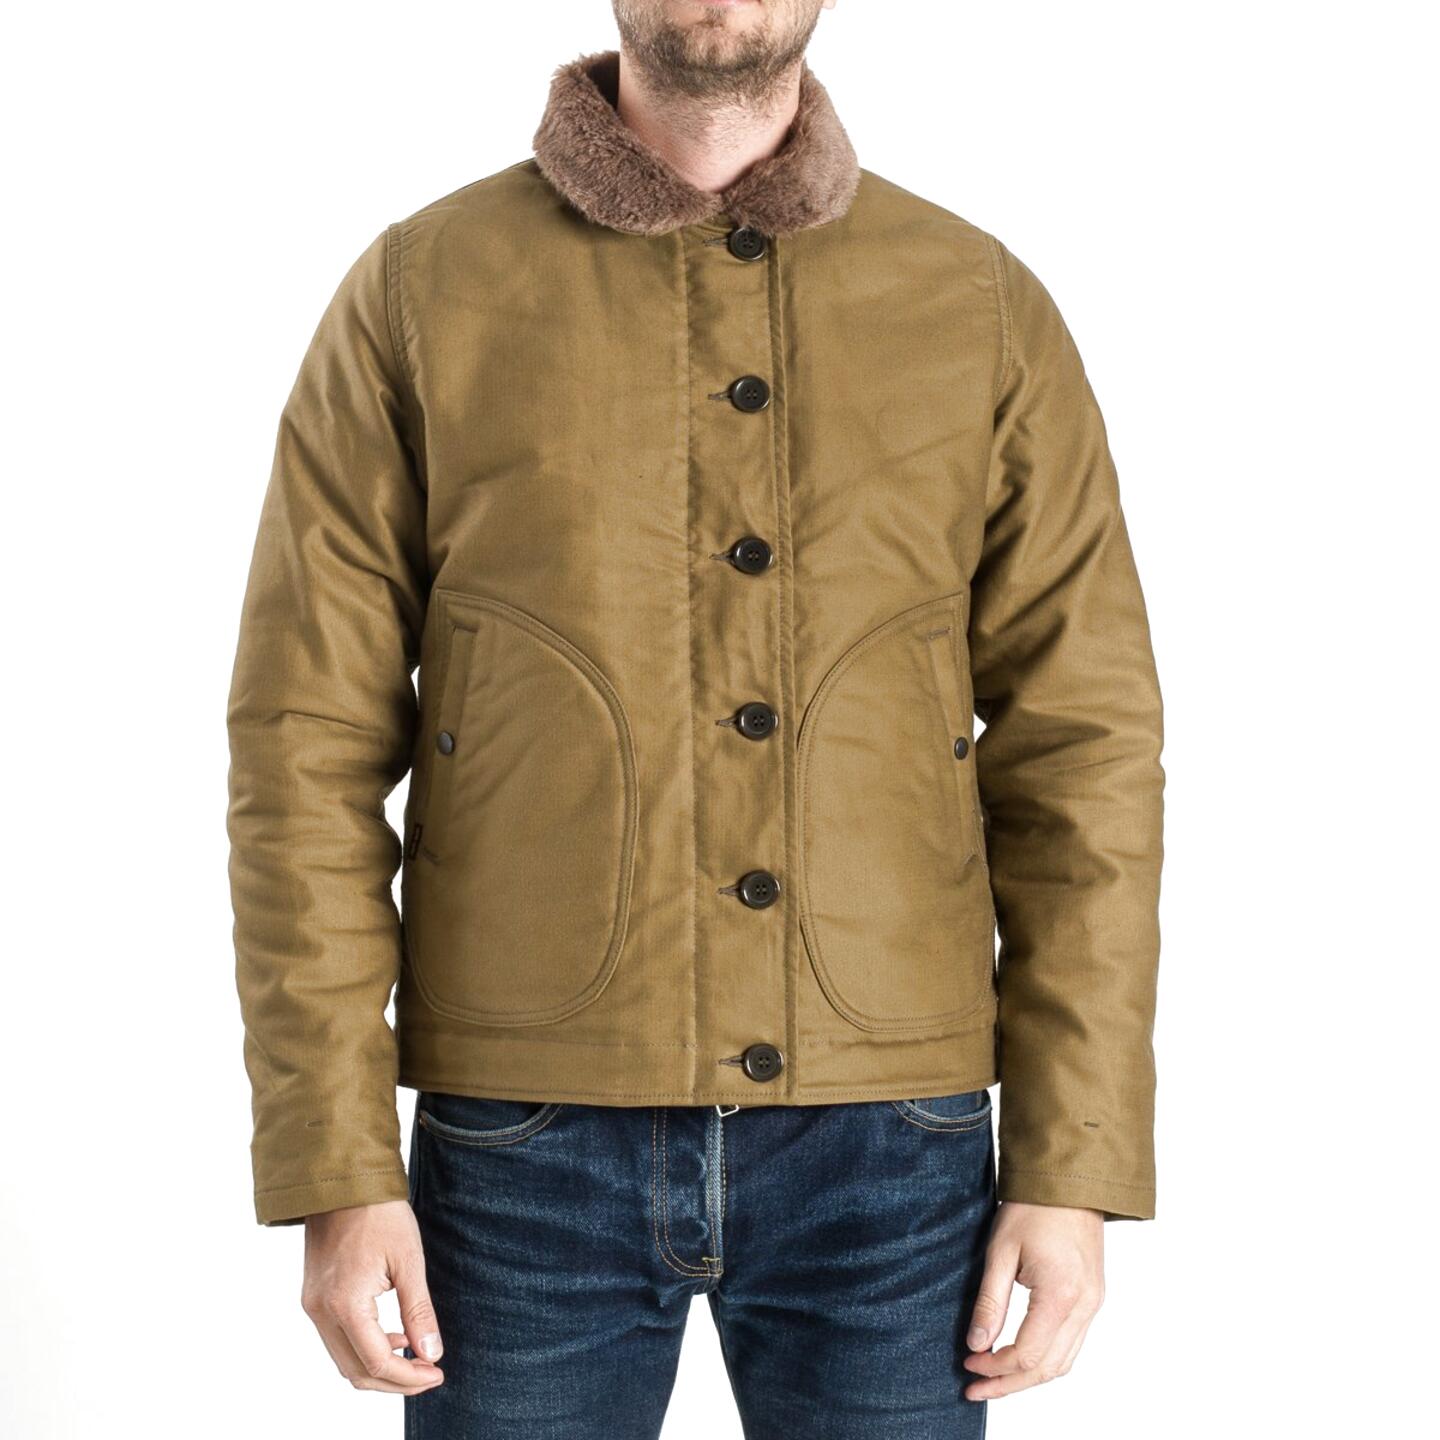 Deck Jacket for sale in UK | 63 used Deck Jackets